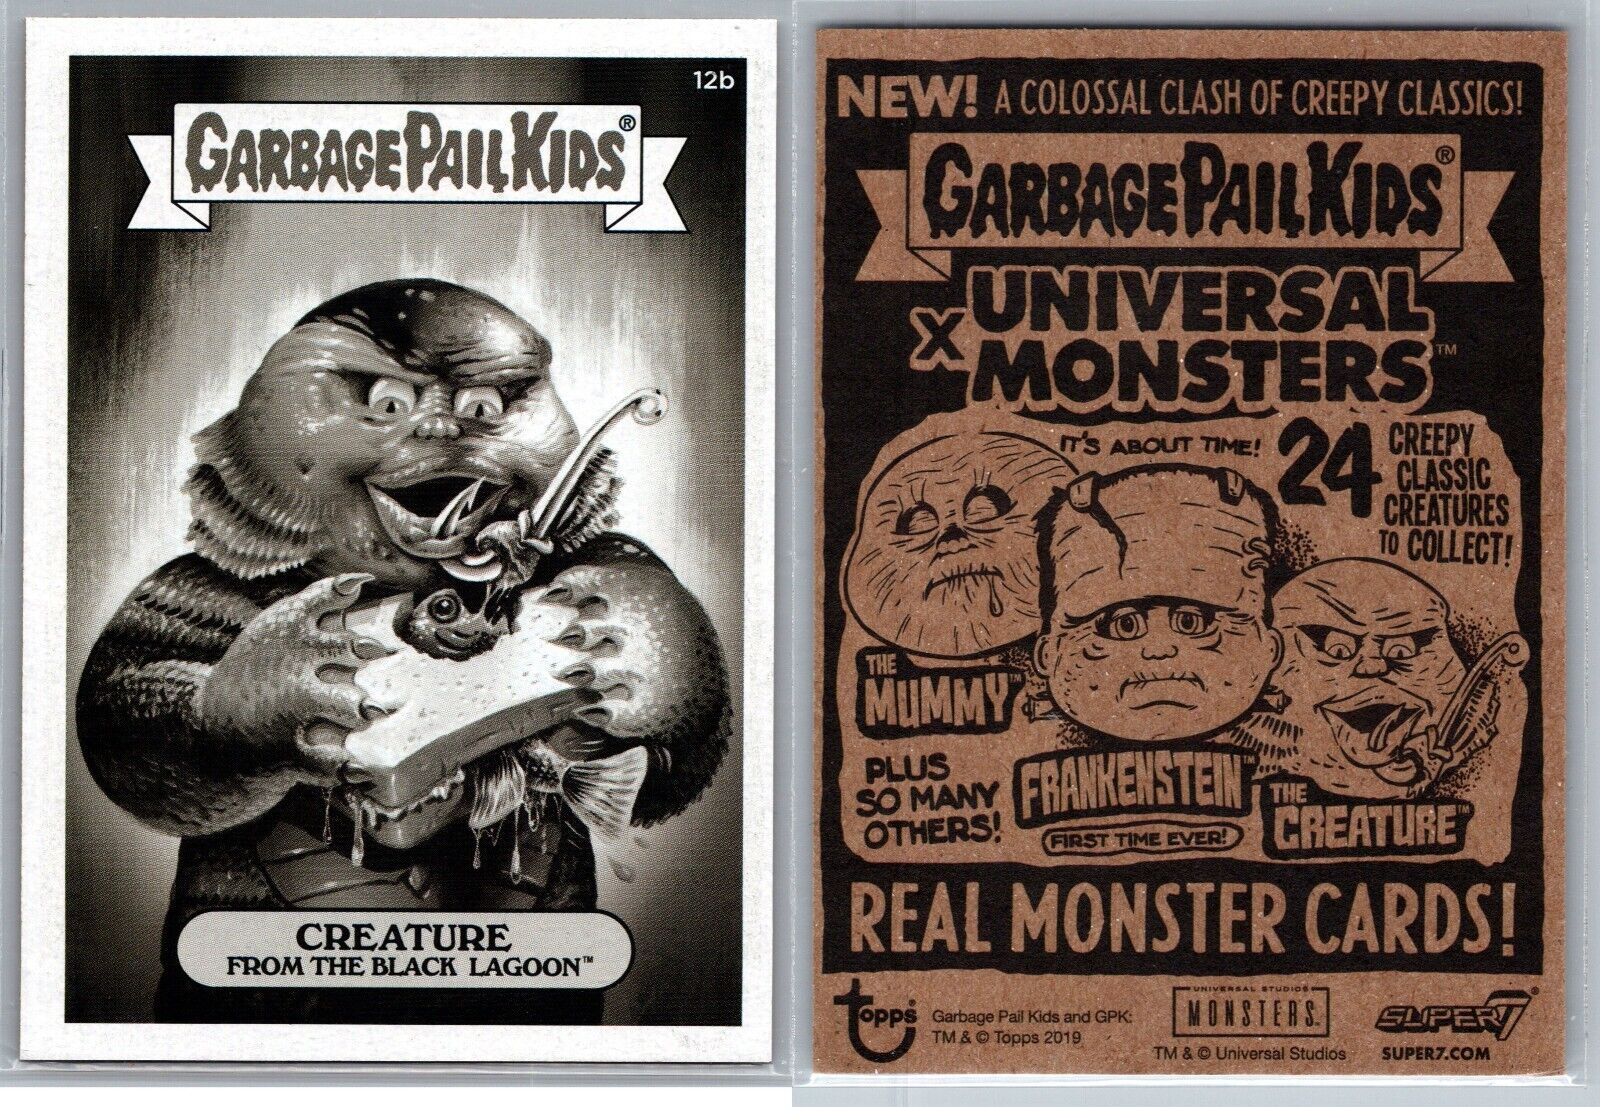 Creature From the Black Lagoon Garbage Pail Kids Universal Monsters Spoof Card